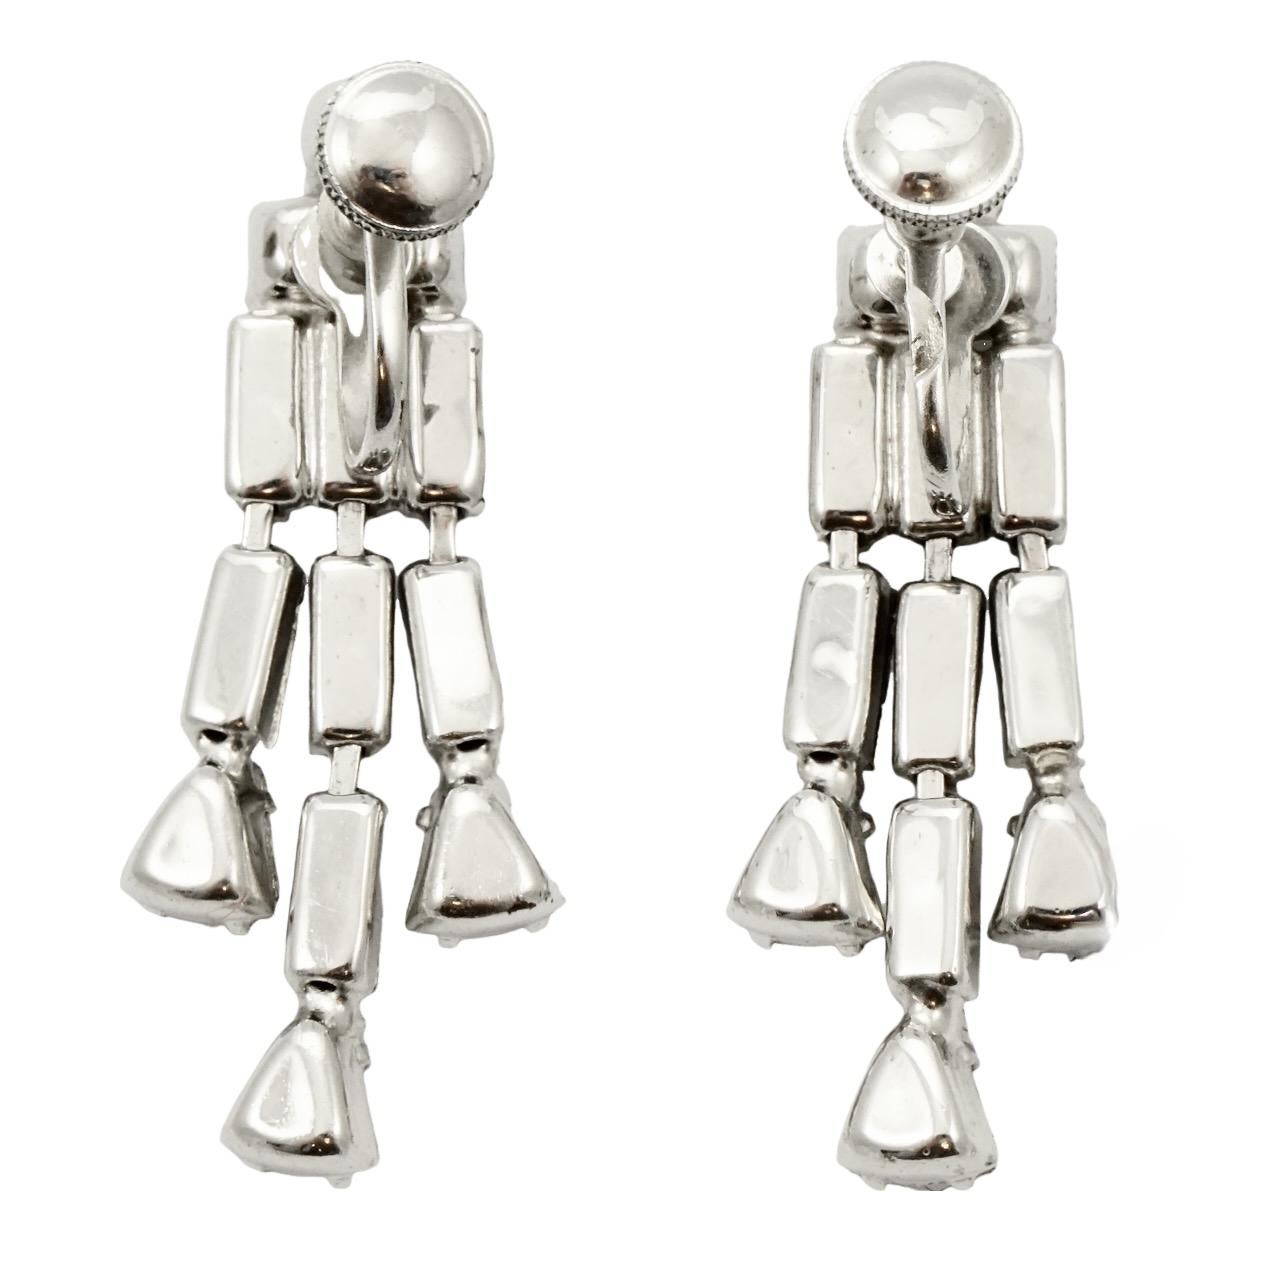 Beautiful silver plated screw back earrings, with sparkling baguette and triangular rhinestones, with a round rhinestone at the top. Measuring length 4.1 cm / 1.6 inches.

These are lovely vintage drop earrings for the evening or a special occasion.